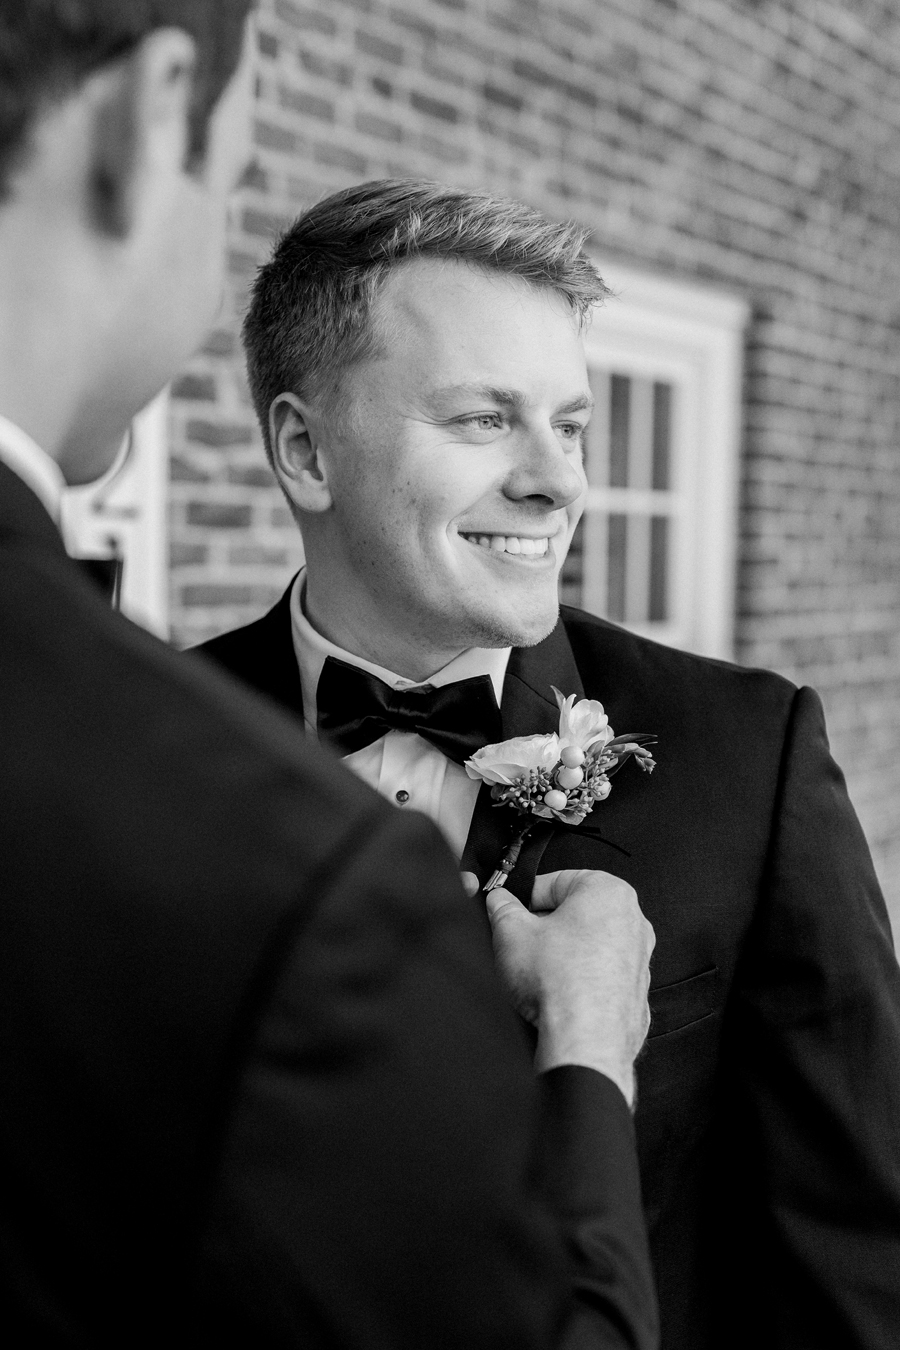 The groom prepares for his Westminster College wedding at Old Hawthorne by Love Tree Studios.